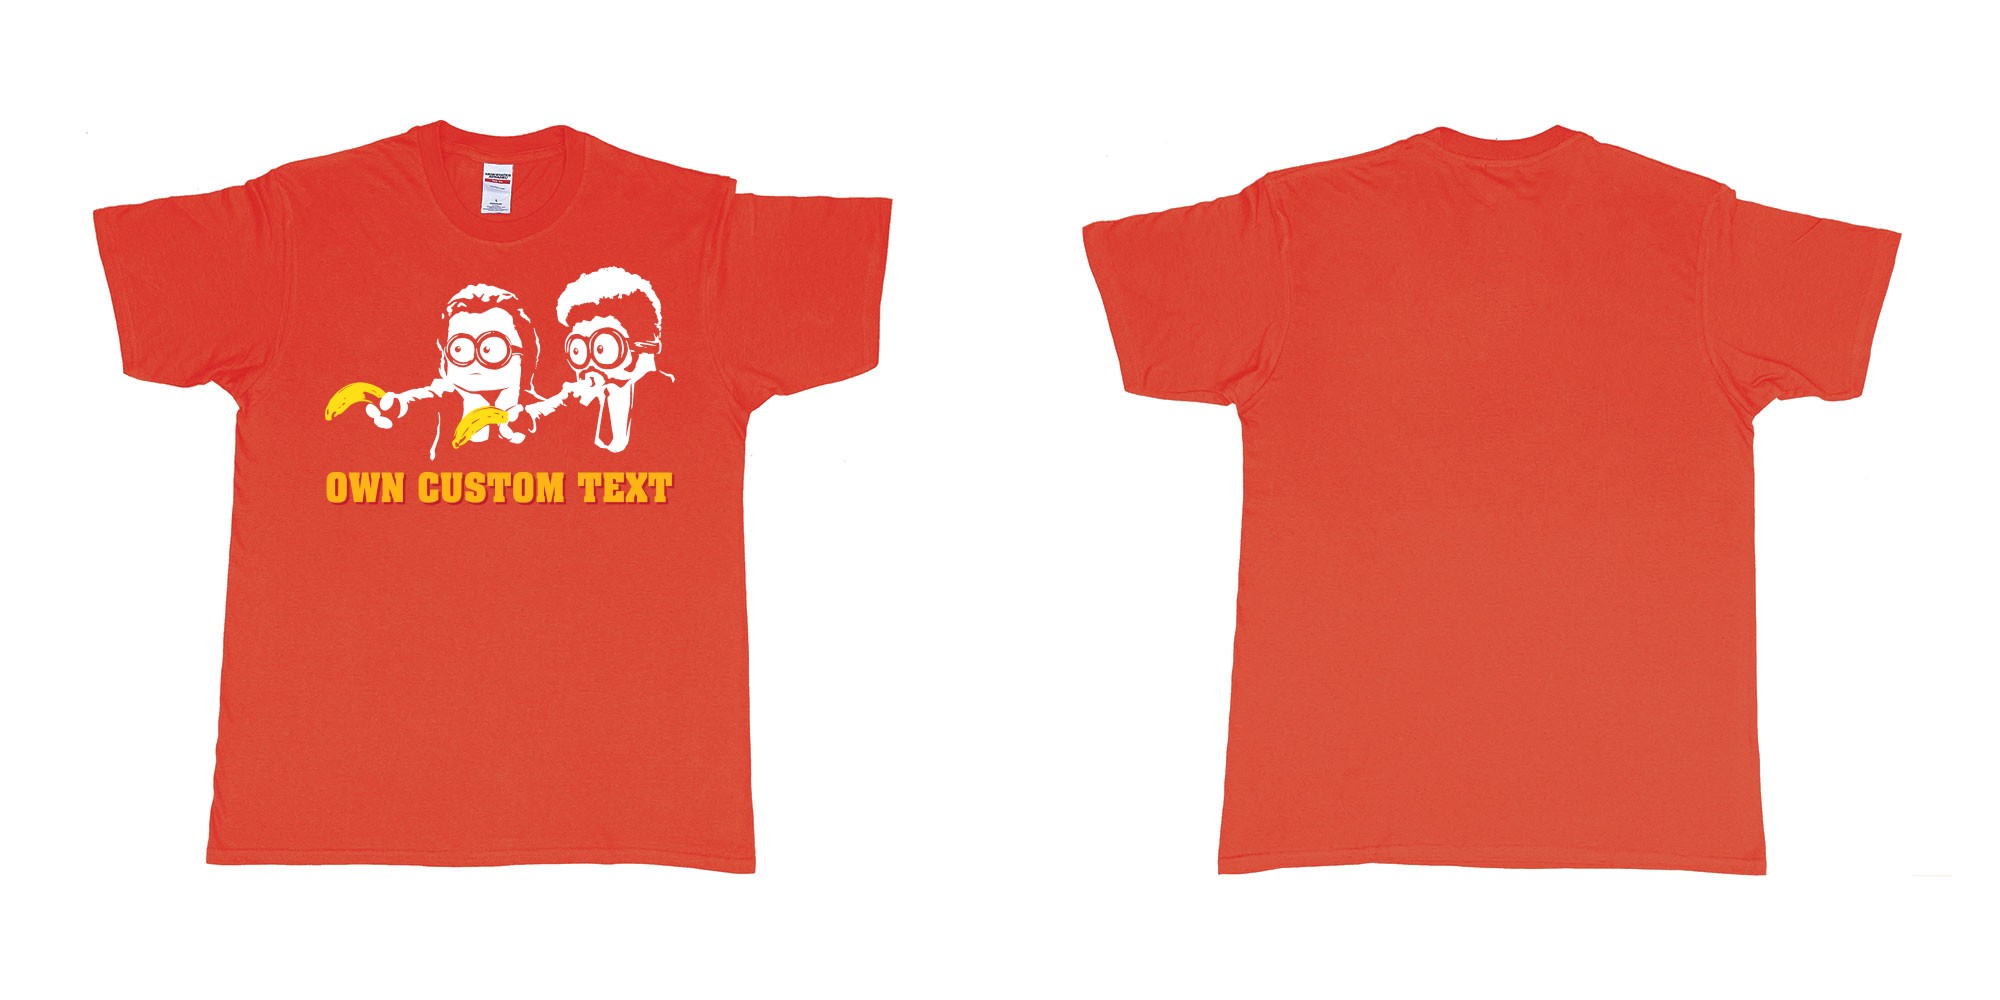 Custom tshirt design minions pulp fiction in fabric color red choice your own text made in Bali by The Pirate Way